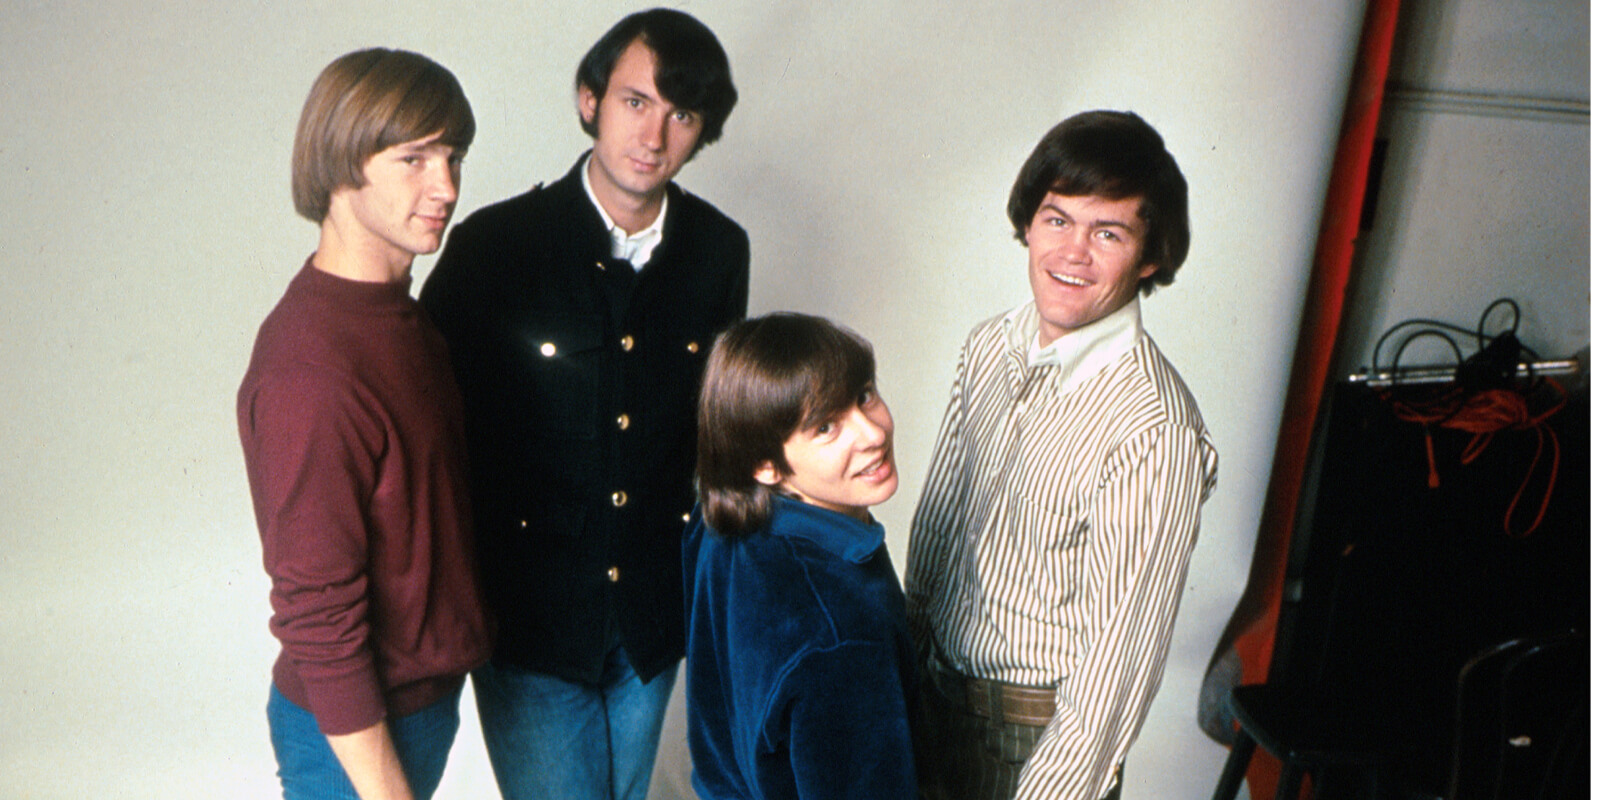 A photo shoot for The Monkees third album, 'Headquarters' featuring Peter Tork, Mike Nesmith, Davy Jones, and Micky Dolenz.